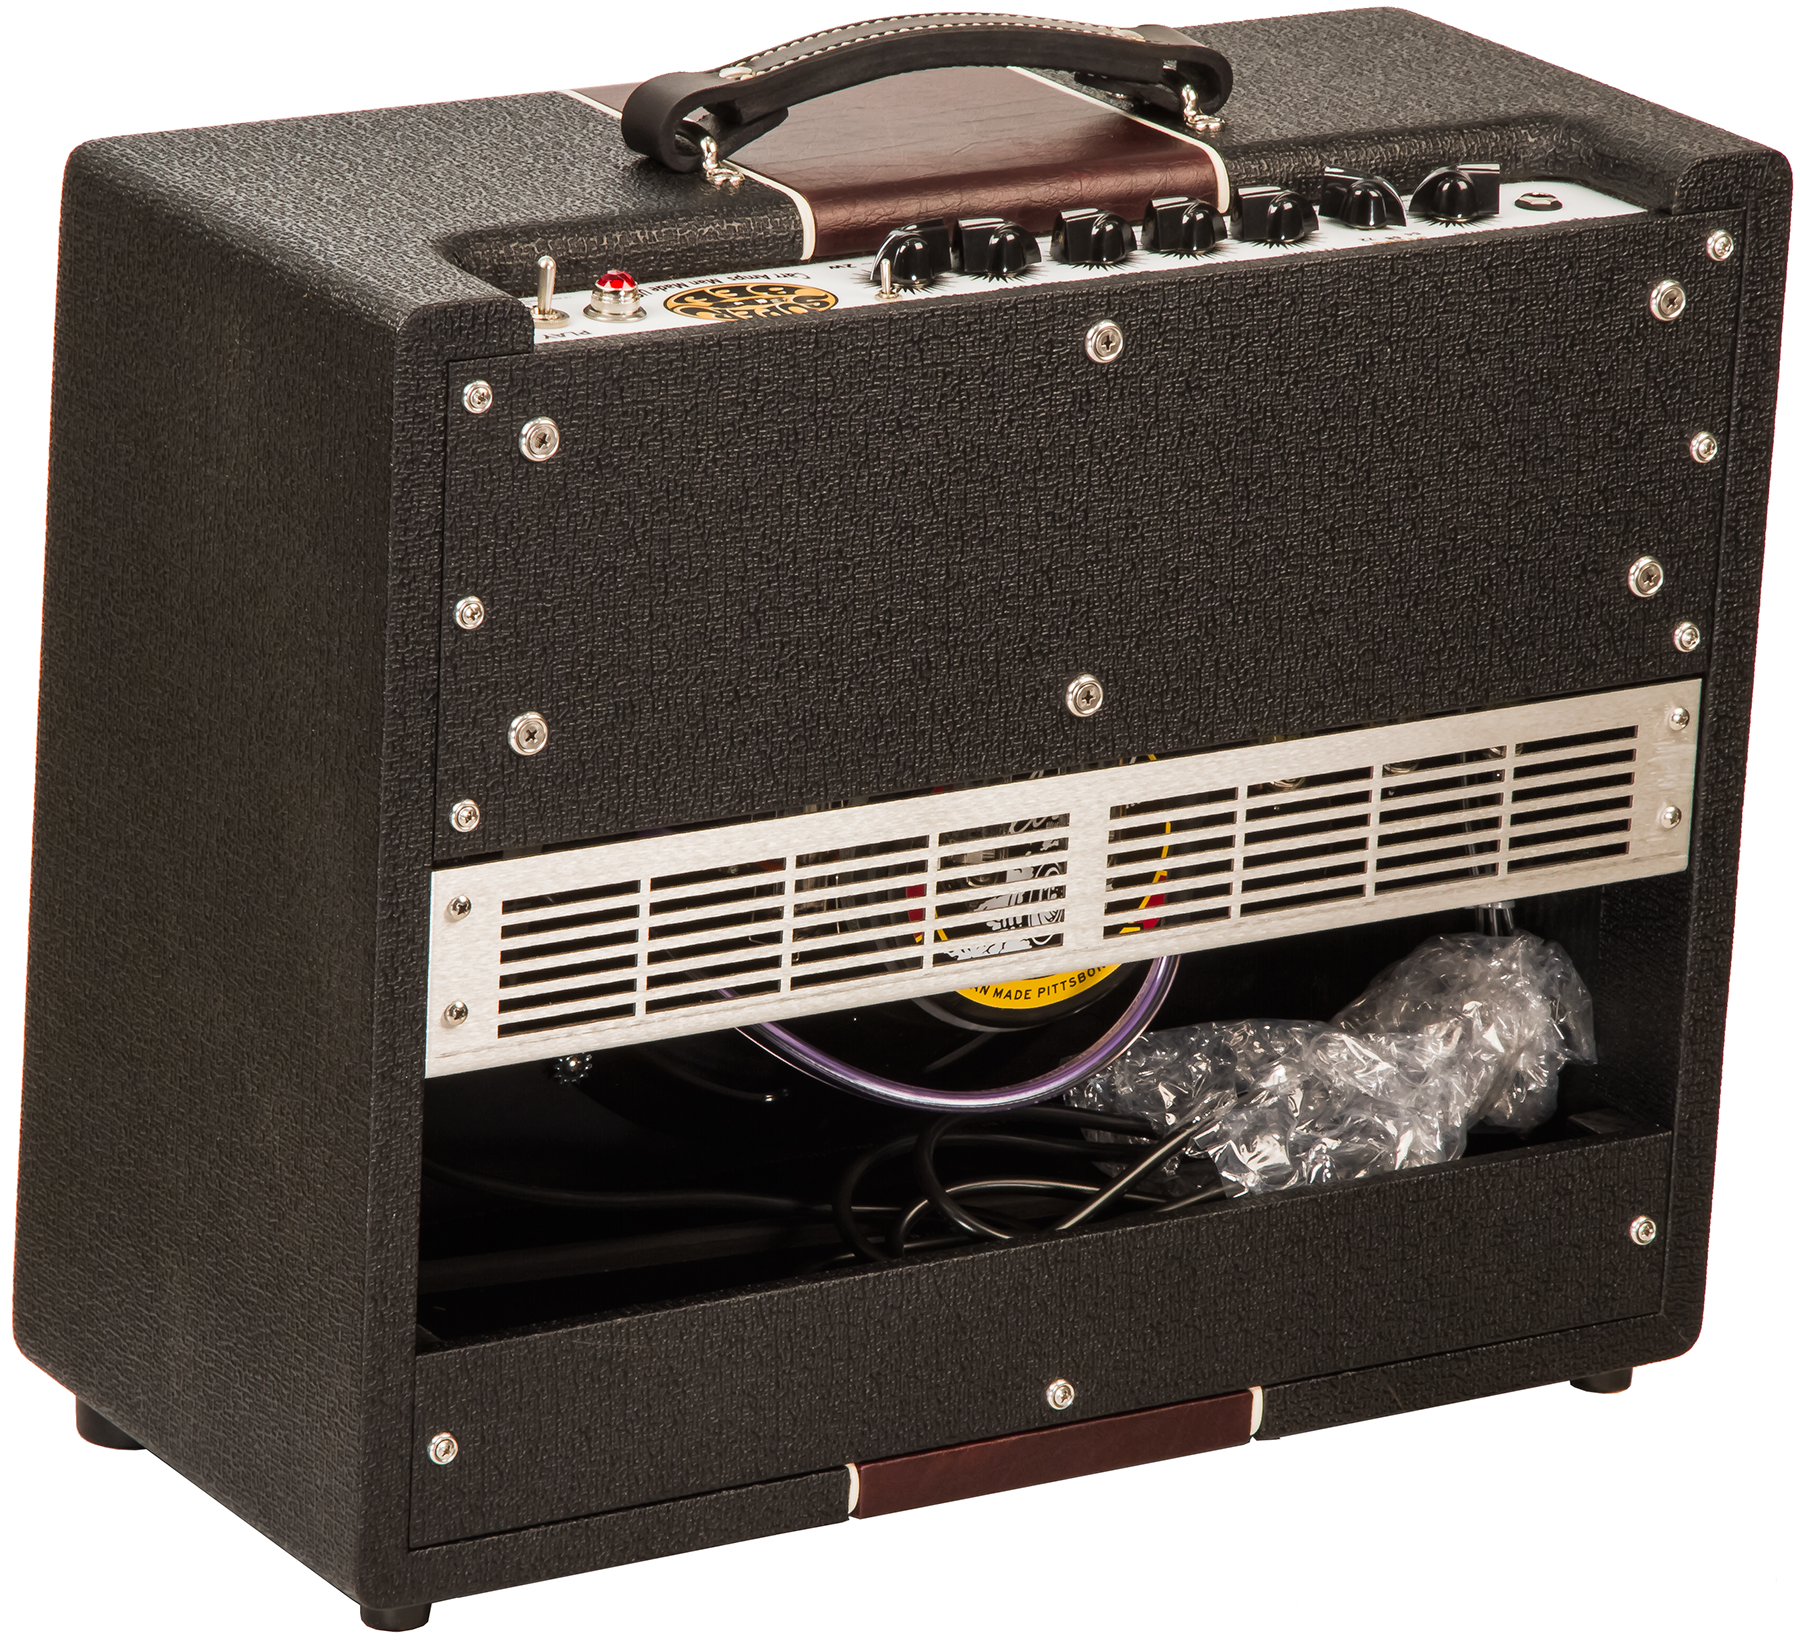 Carr Amplifiers Super Bee 1-12 Combo 10w 1x12 Black/wine - Electric guitar combo amp - Variation 1